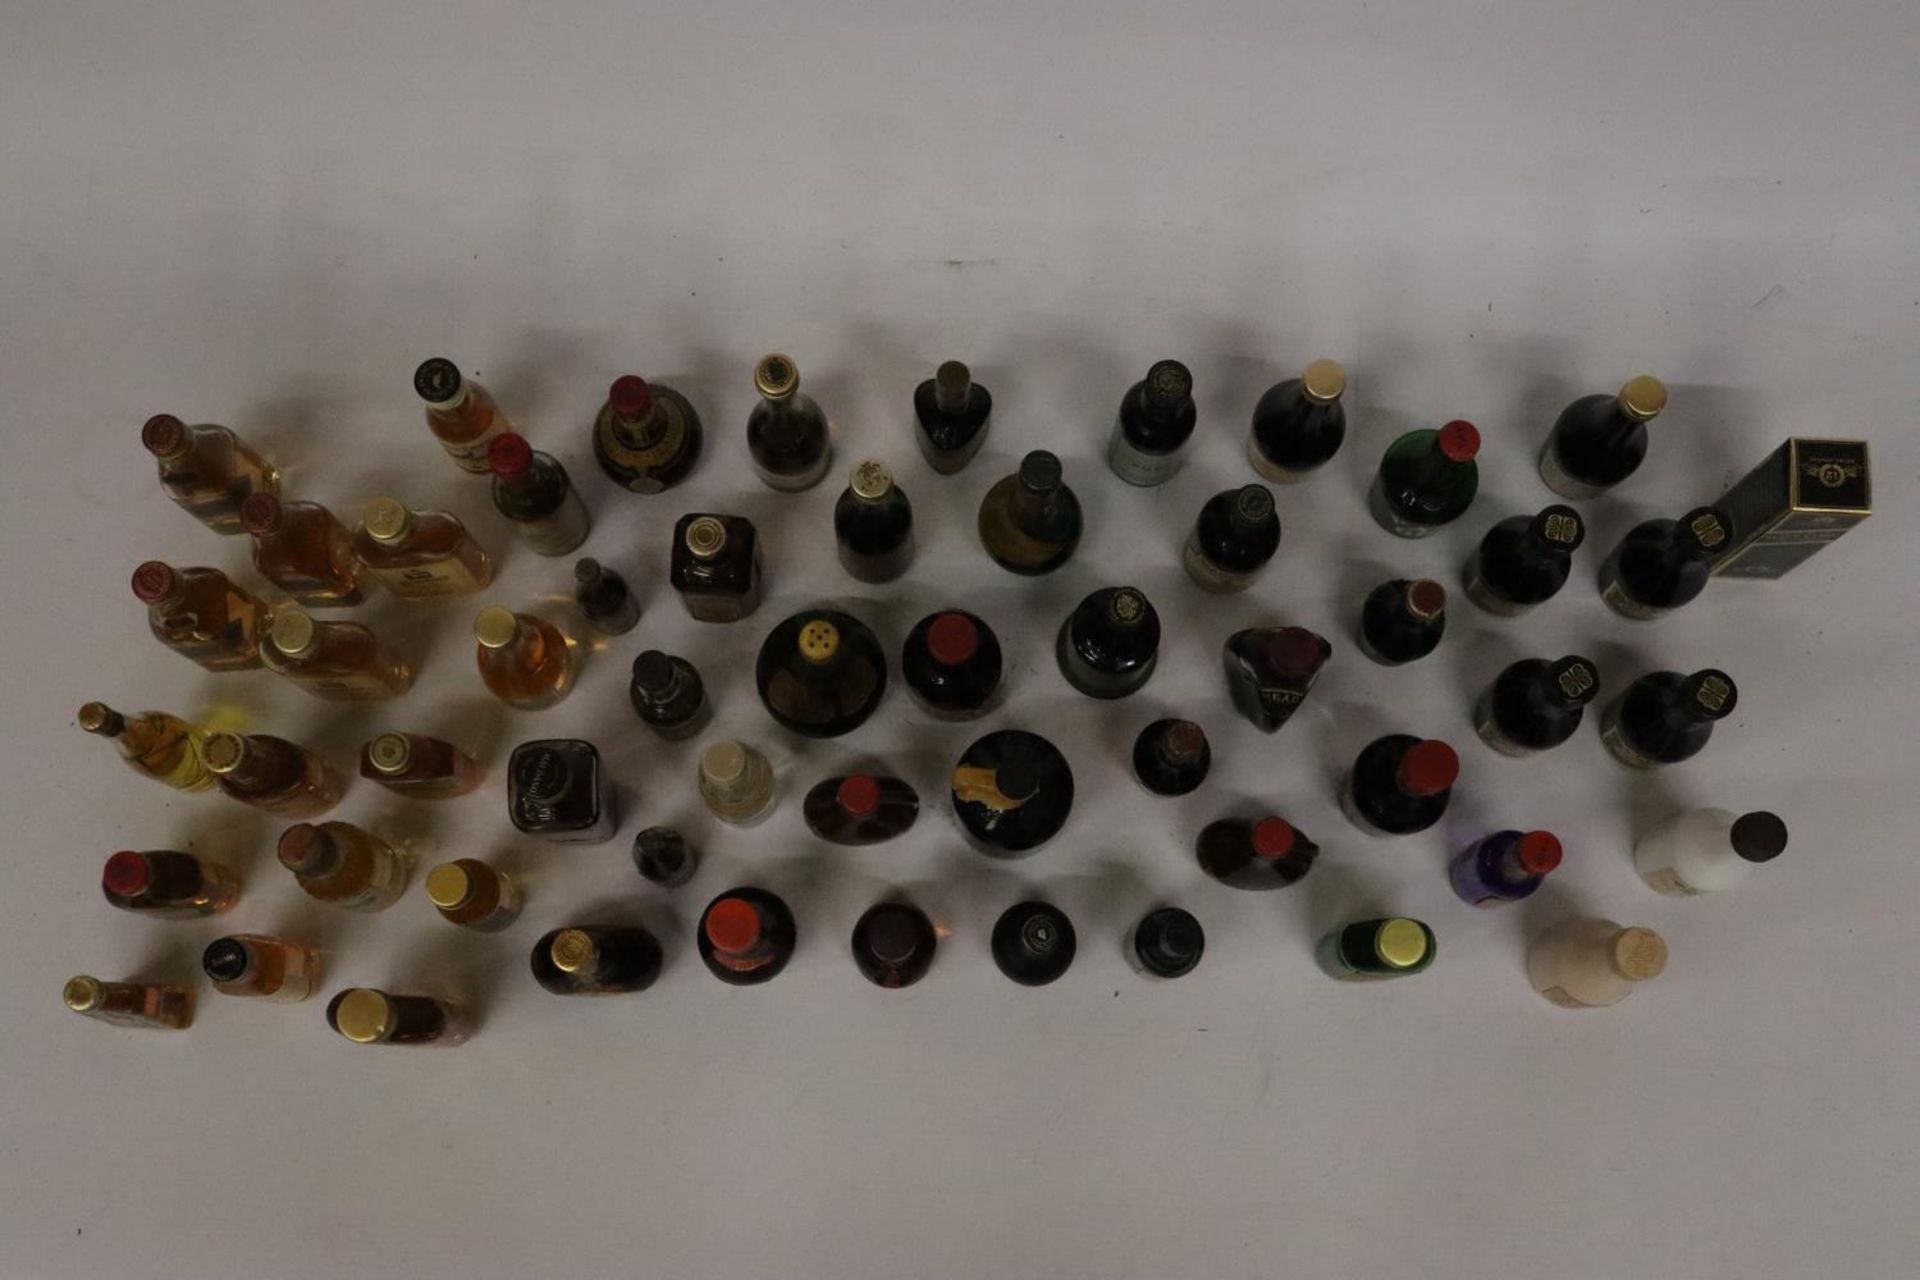 A LARGE QUANTITY OF MINIATURE BOTTLES OF ALCOHOL - Image 7 of 10